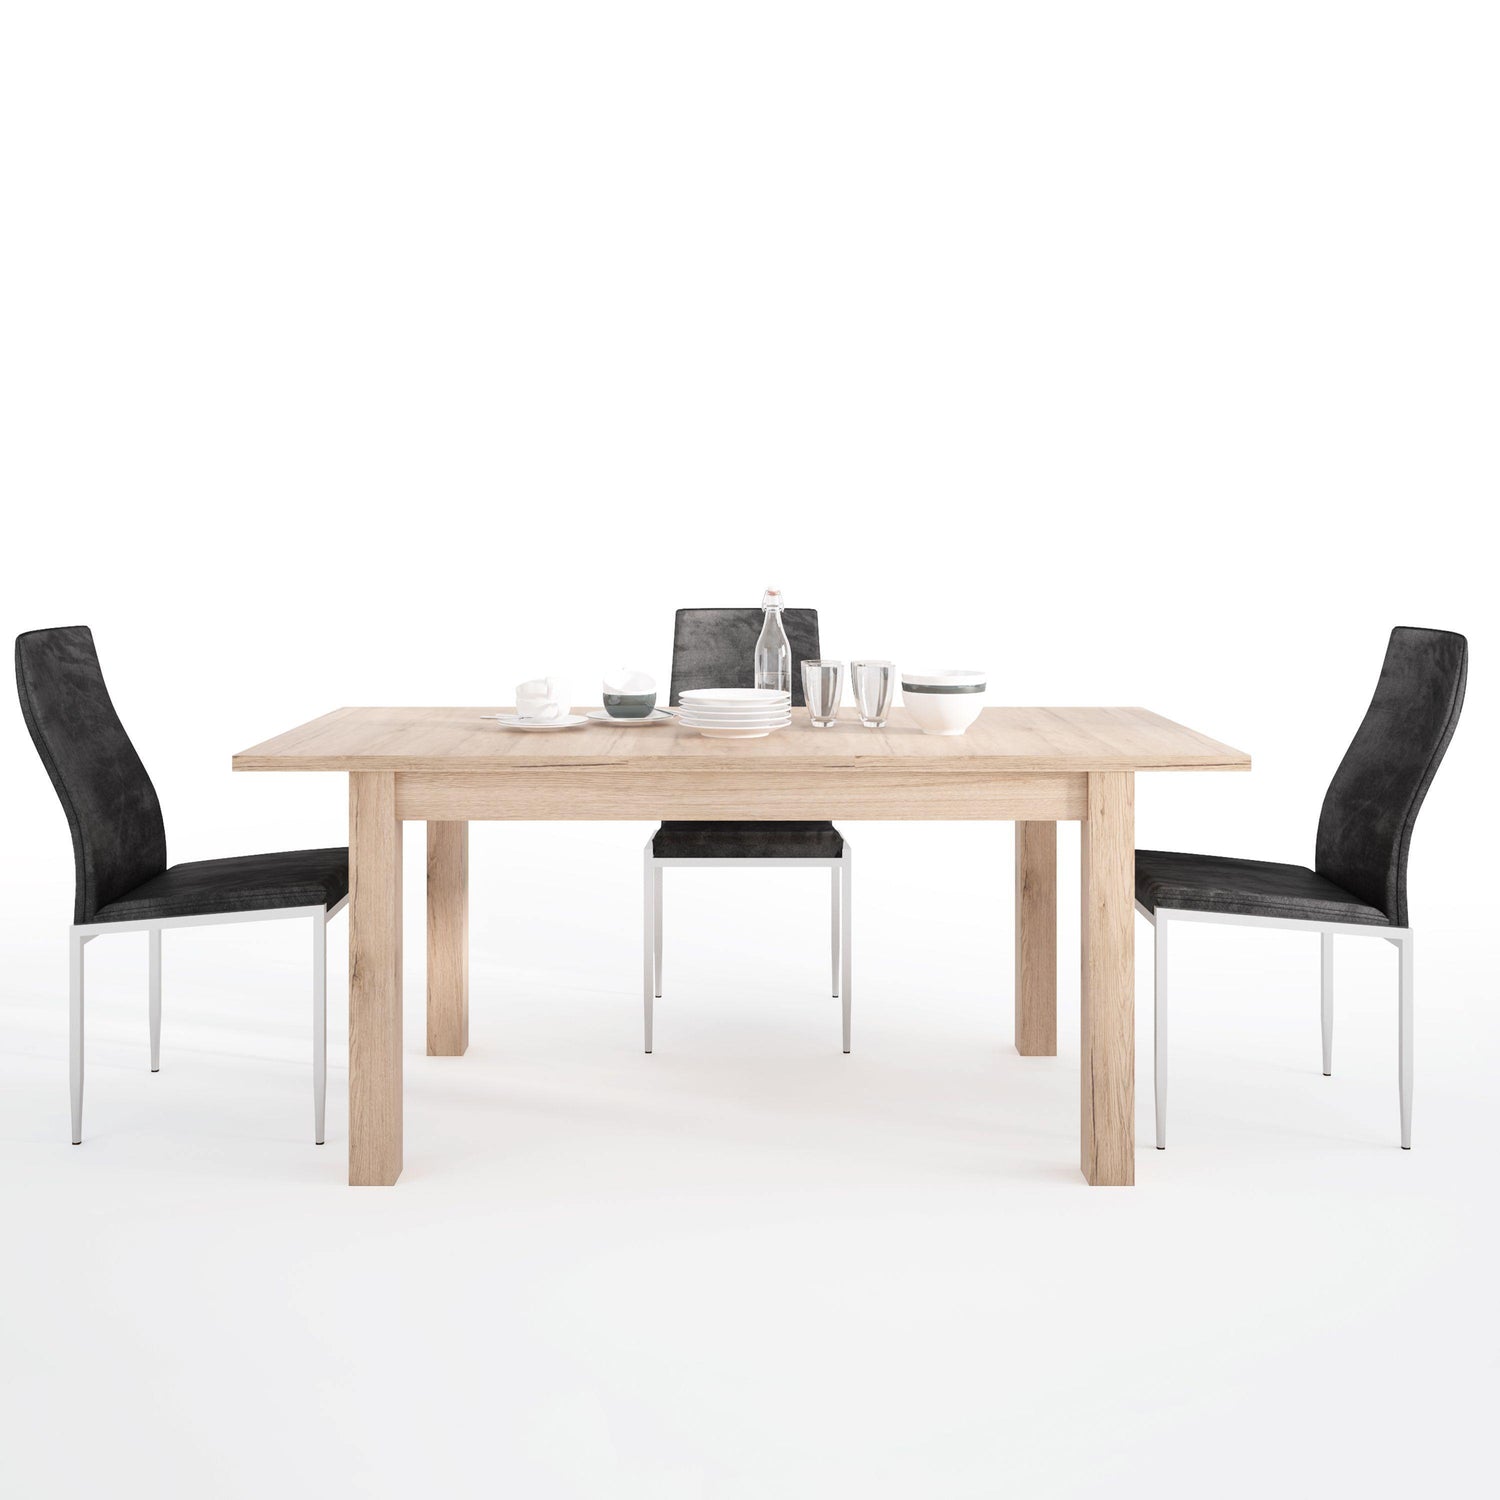 Dining set package Kensington Extending Dining Table + Milan High Back Chair - Home Utopia 